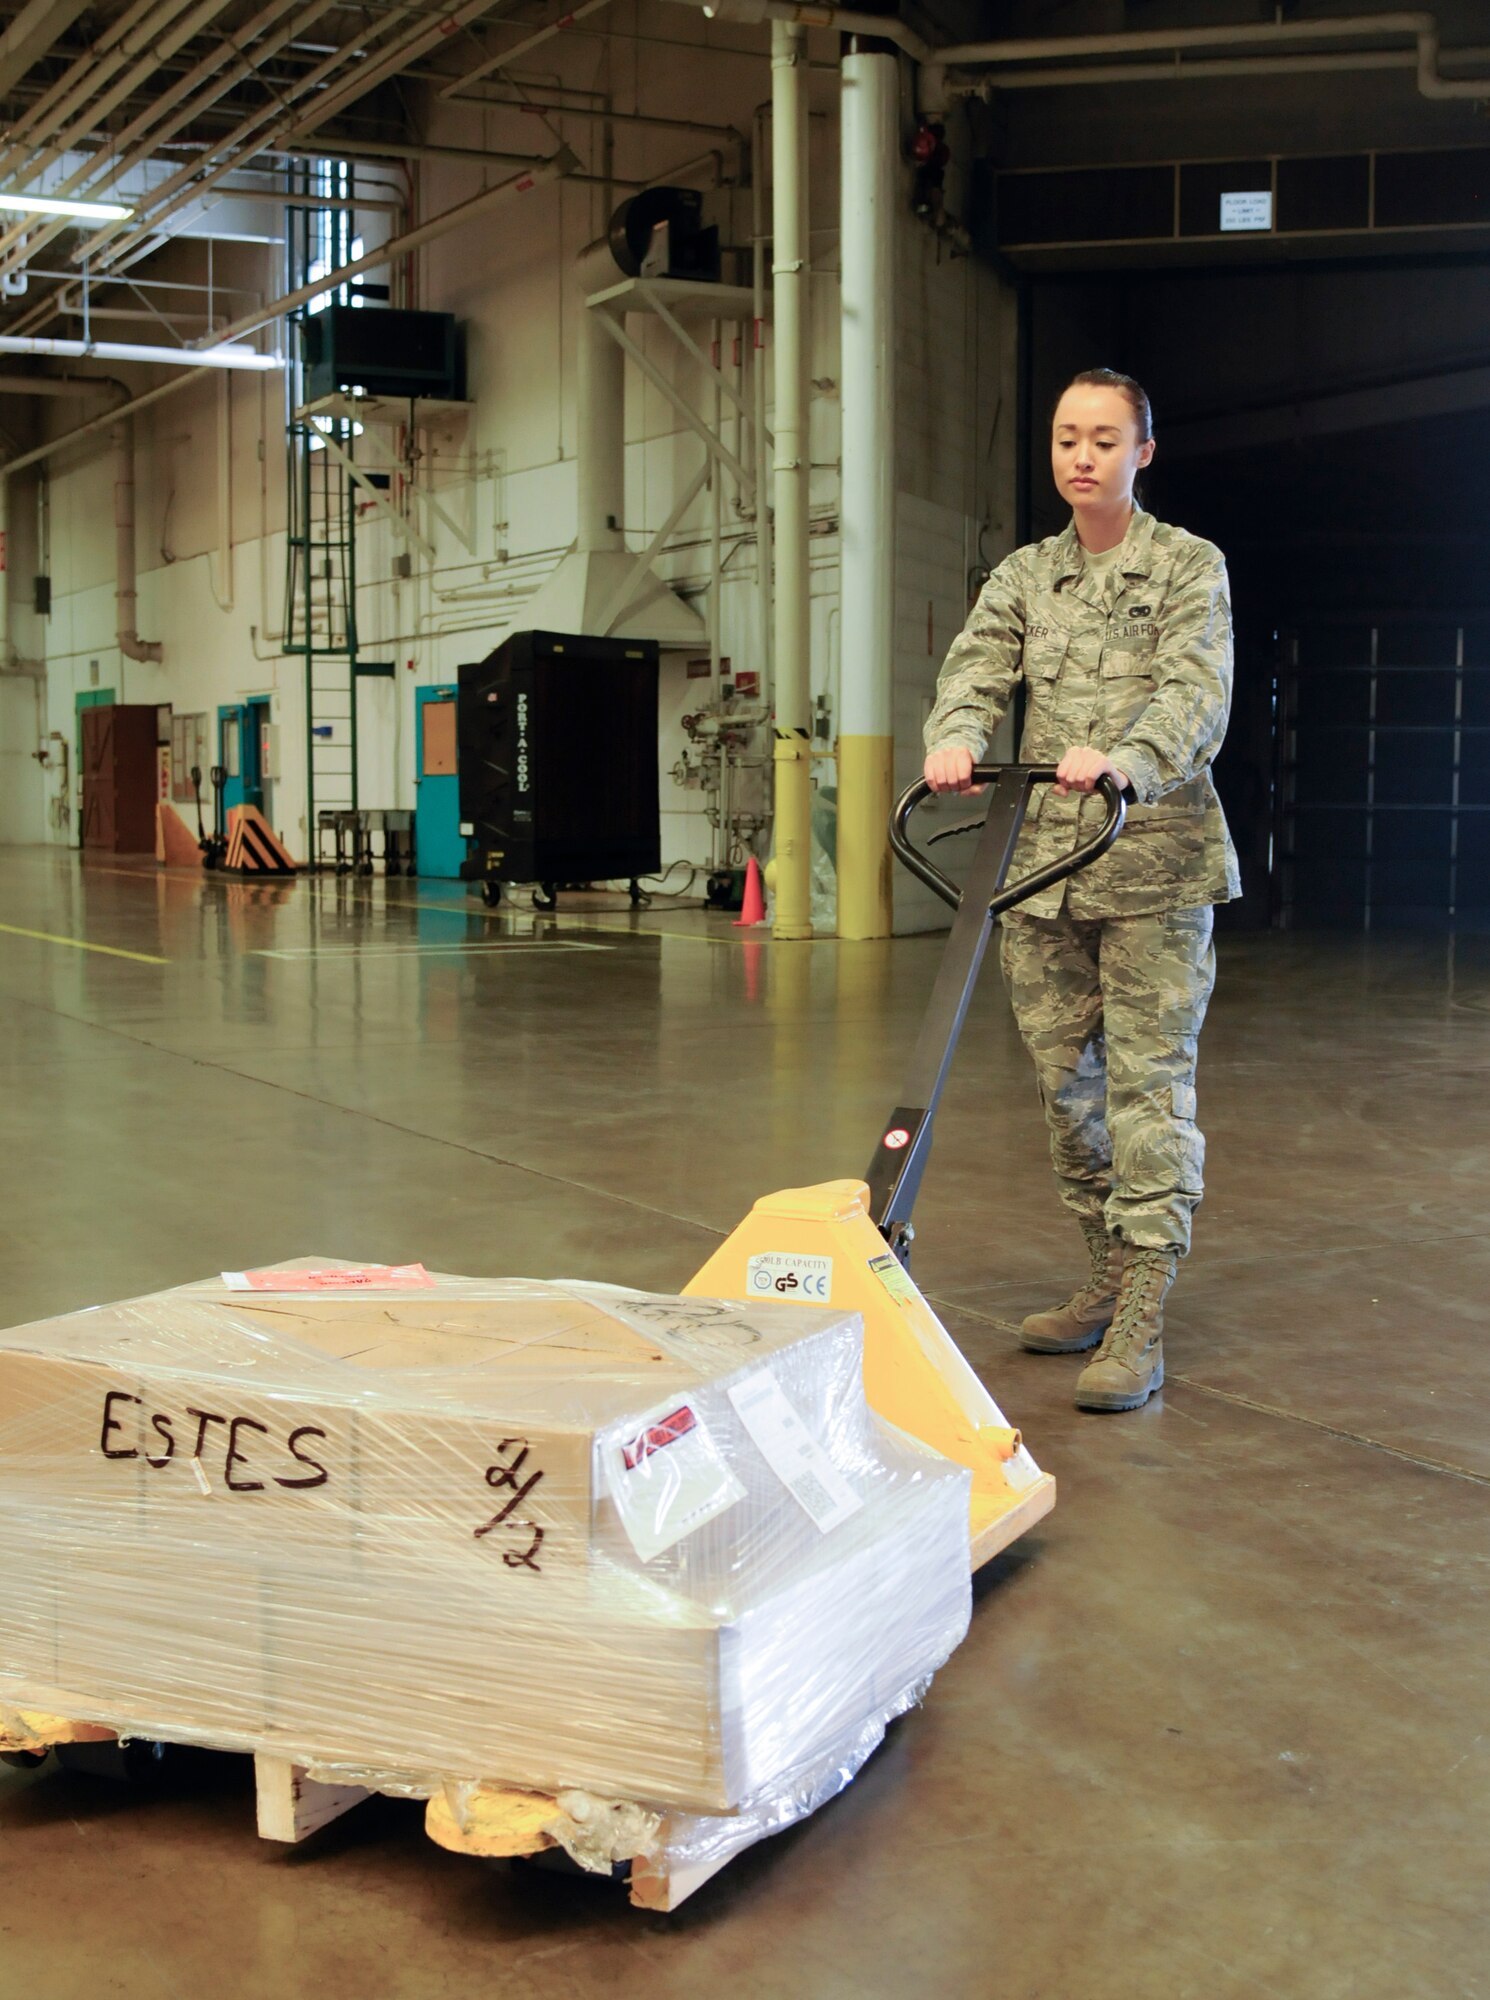 Senior Airman Susan Kicker, 90th Logistics Readiness Squadron Inbound Management clerk, pulls a pallet in the 90th LRS Warehouse on F.E. Warren Air Force Base, Wyo., Sept. 2, 2015. Inbound cargo Airmen handle received cargo shipped to base and distribute it to the organizations on base who need it. (U.S. Air Force photo by Senior Airman Jason Wiese)